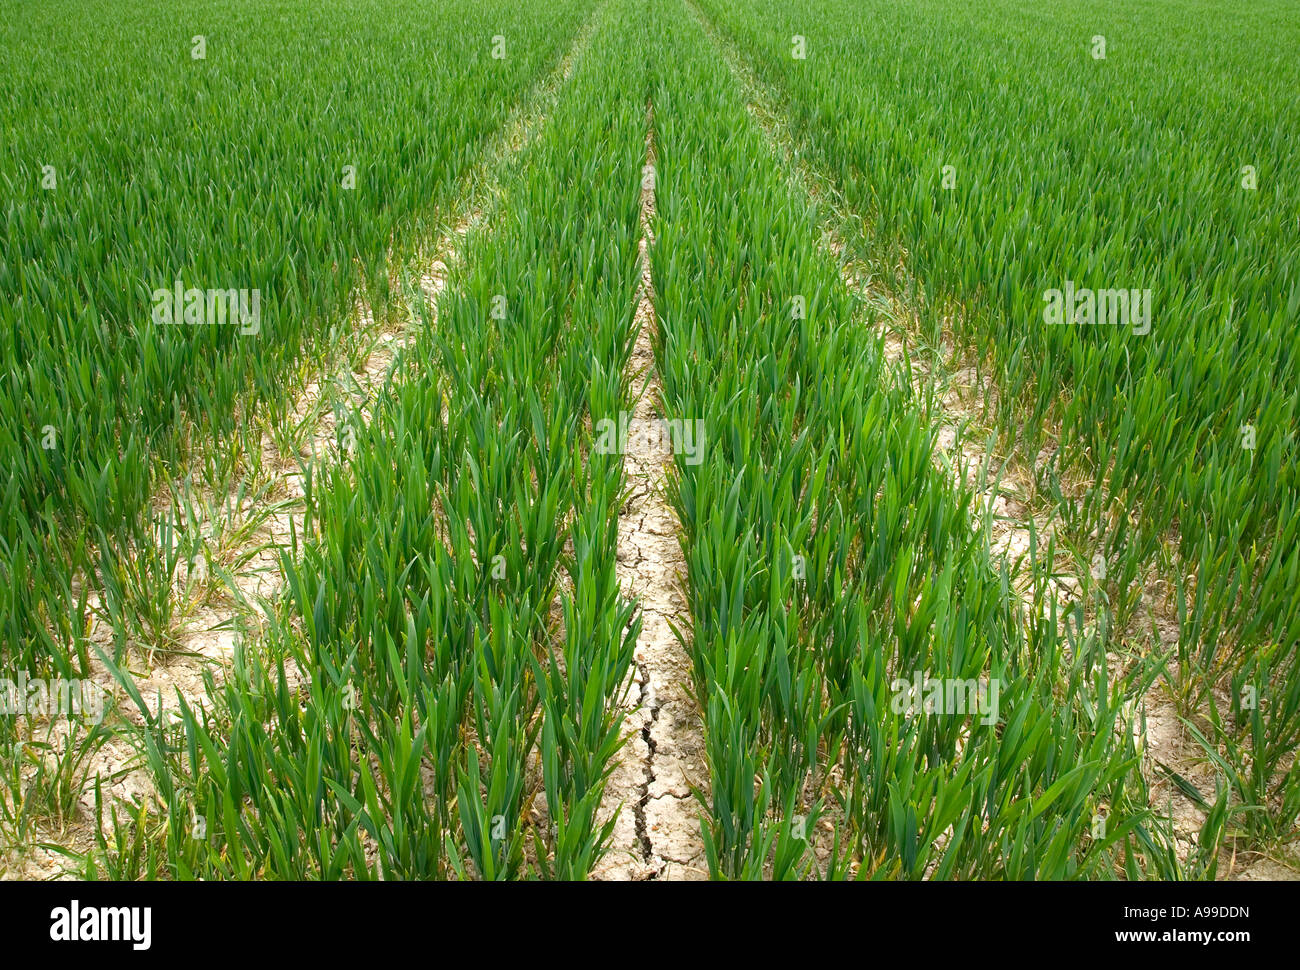 Crop field with tractor tracks. Stock Photo